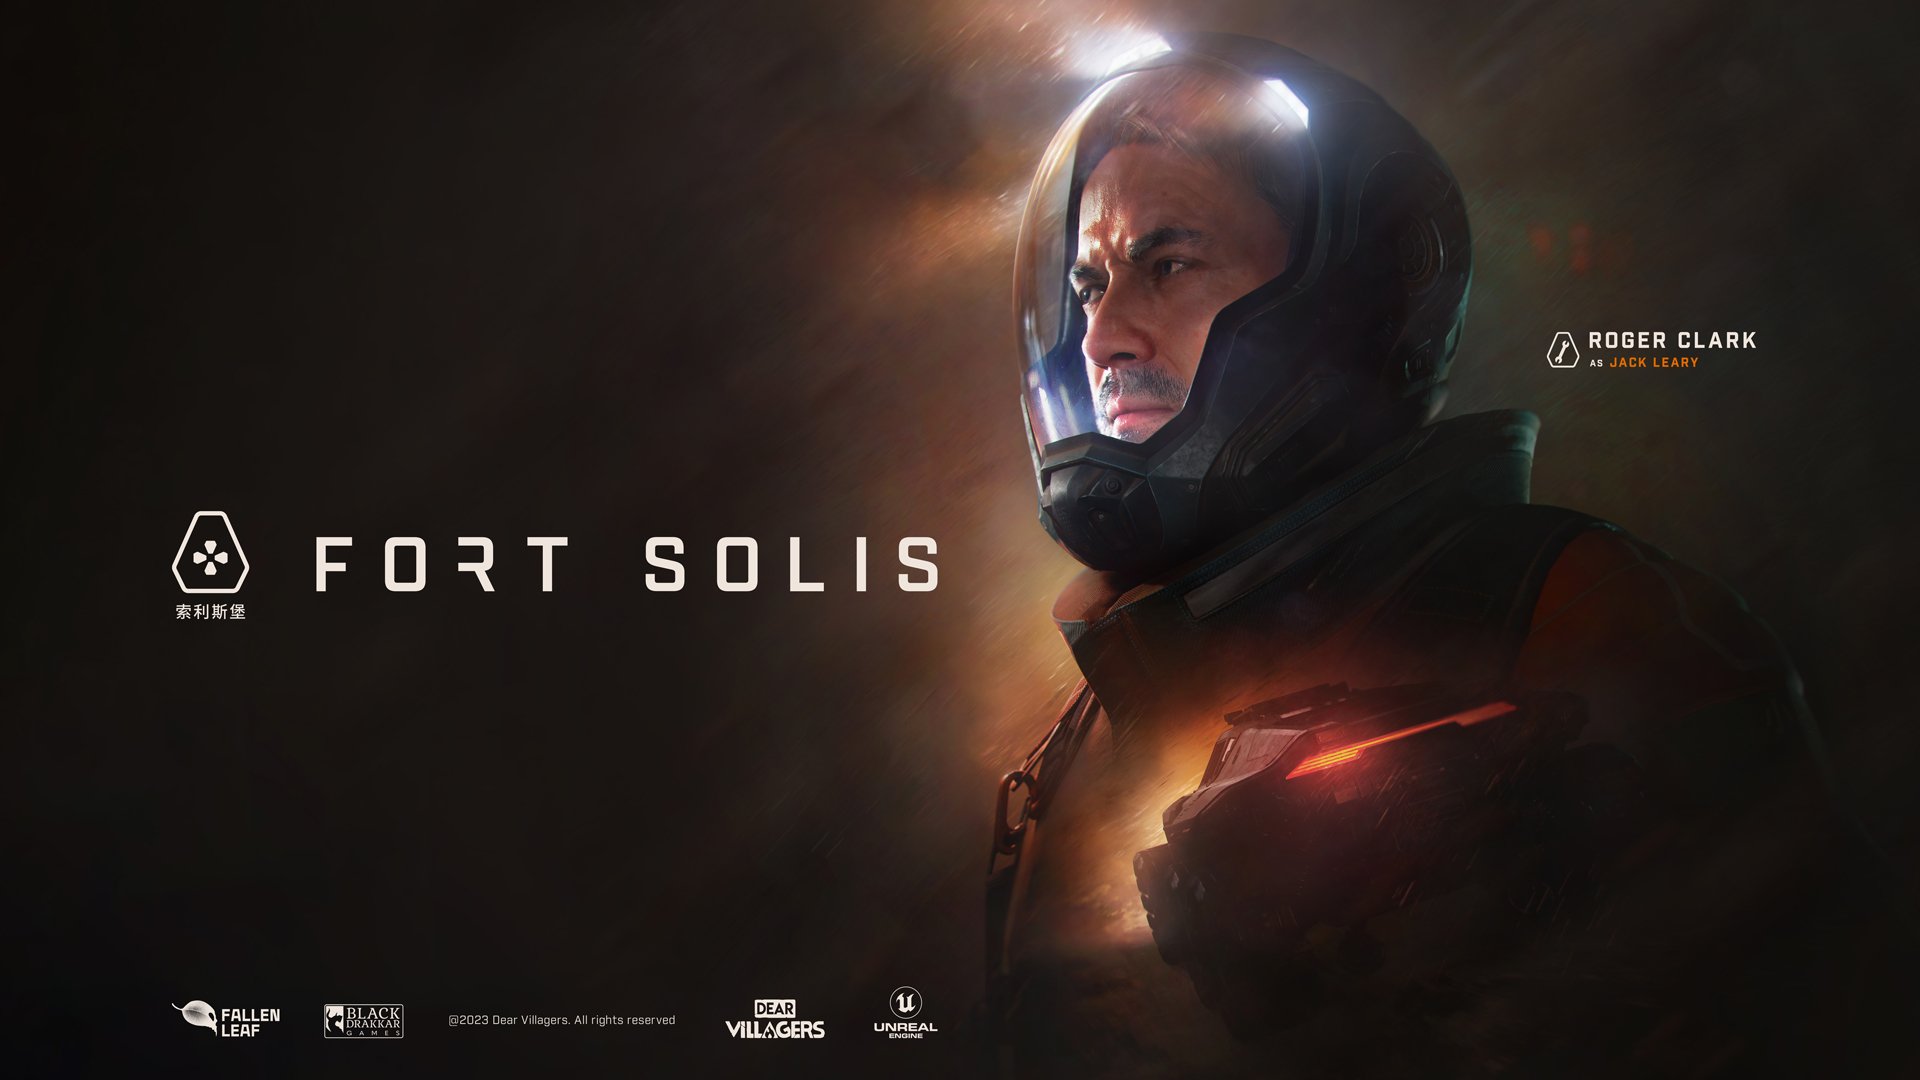 Fort Solis - IGN